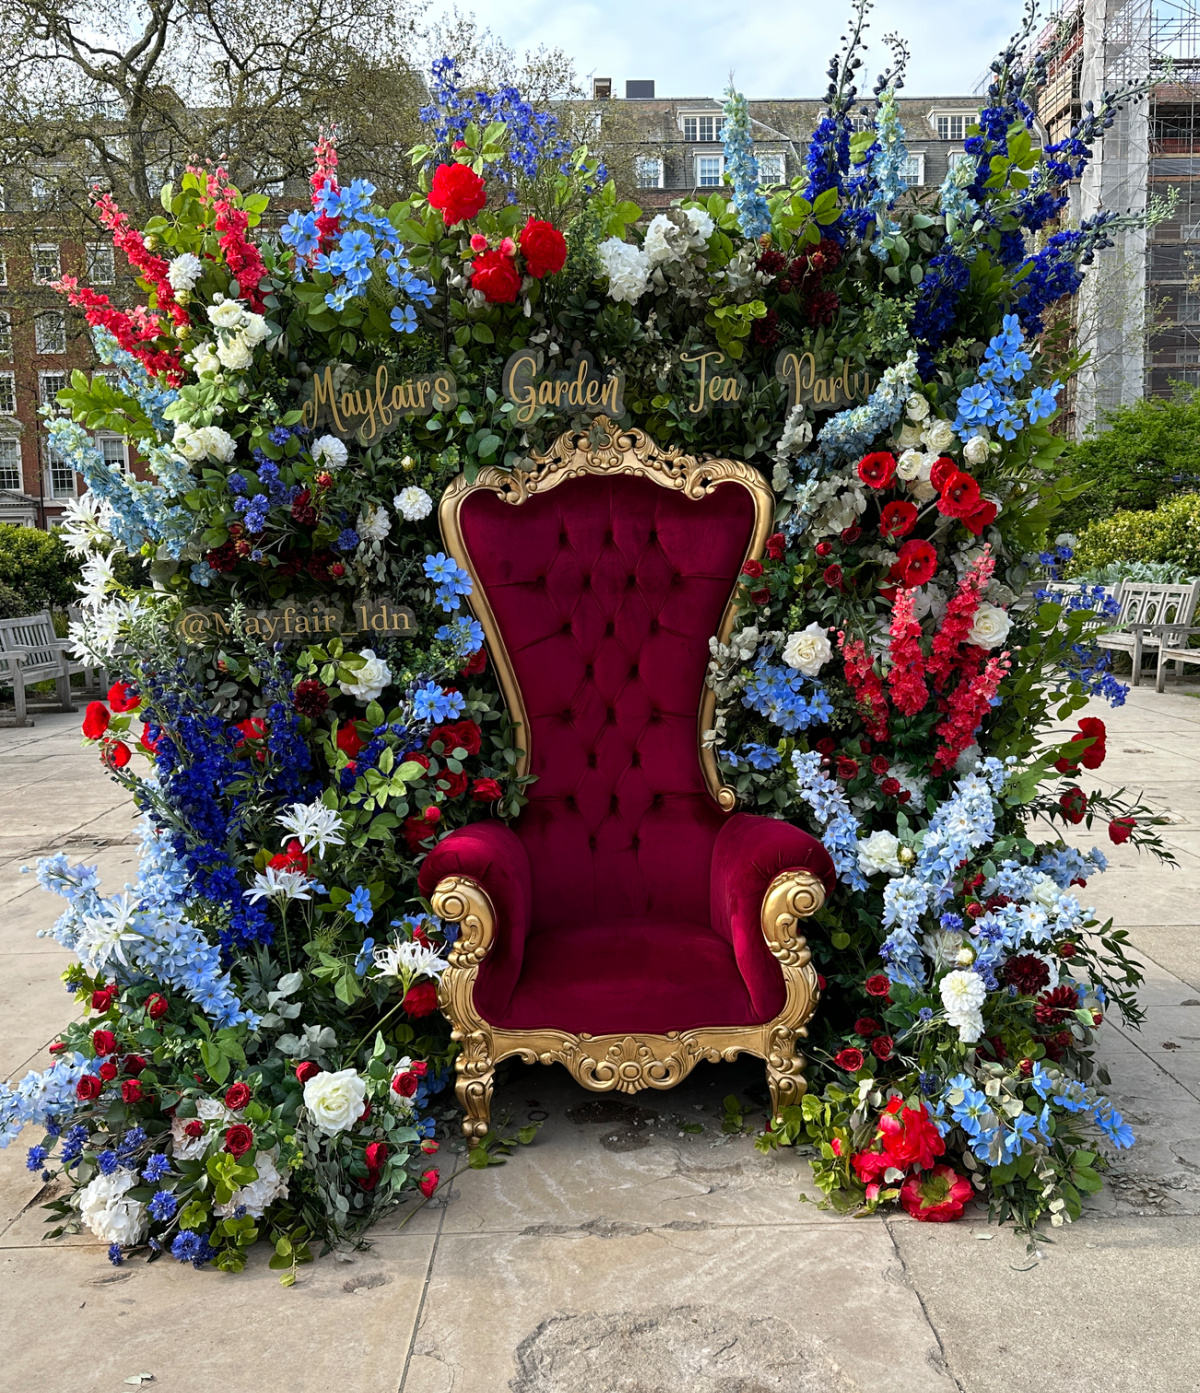 A throne surrounded by flowers in Grosvenor Square